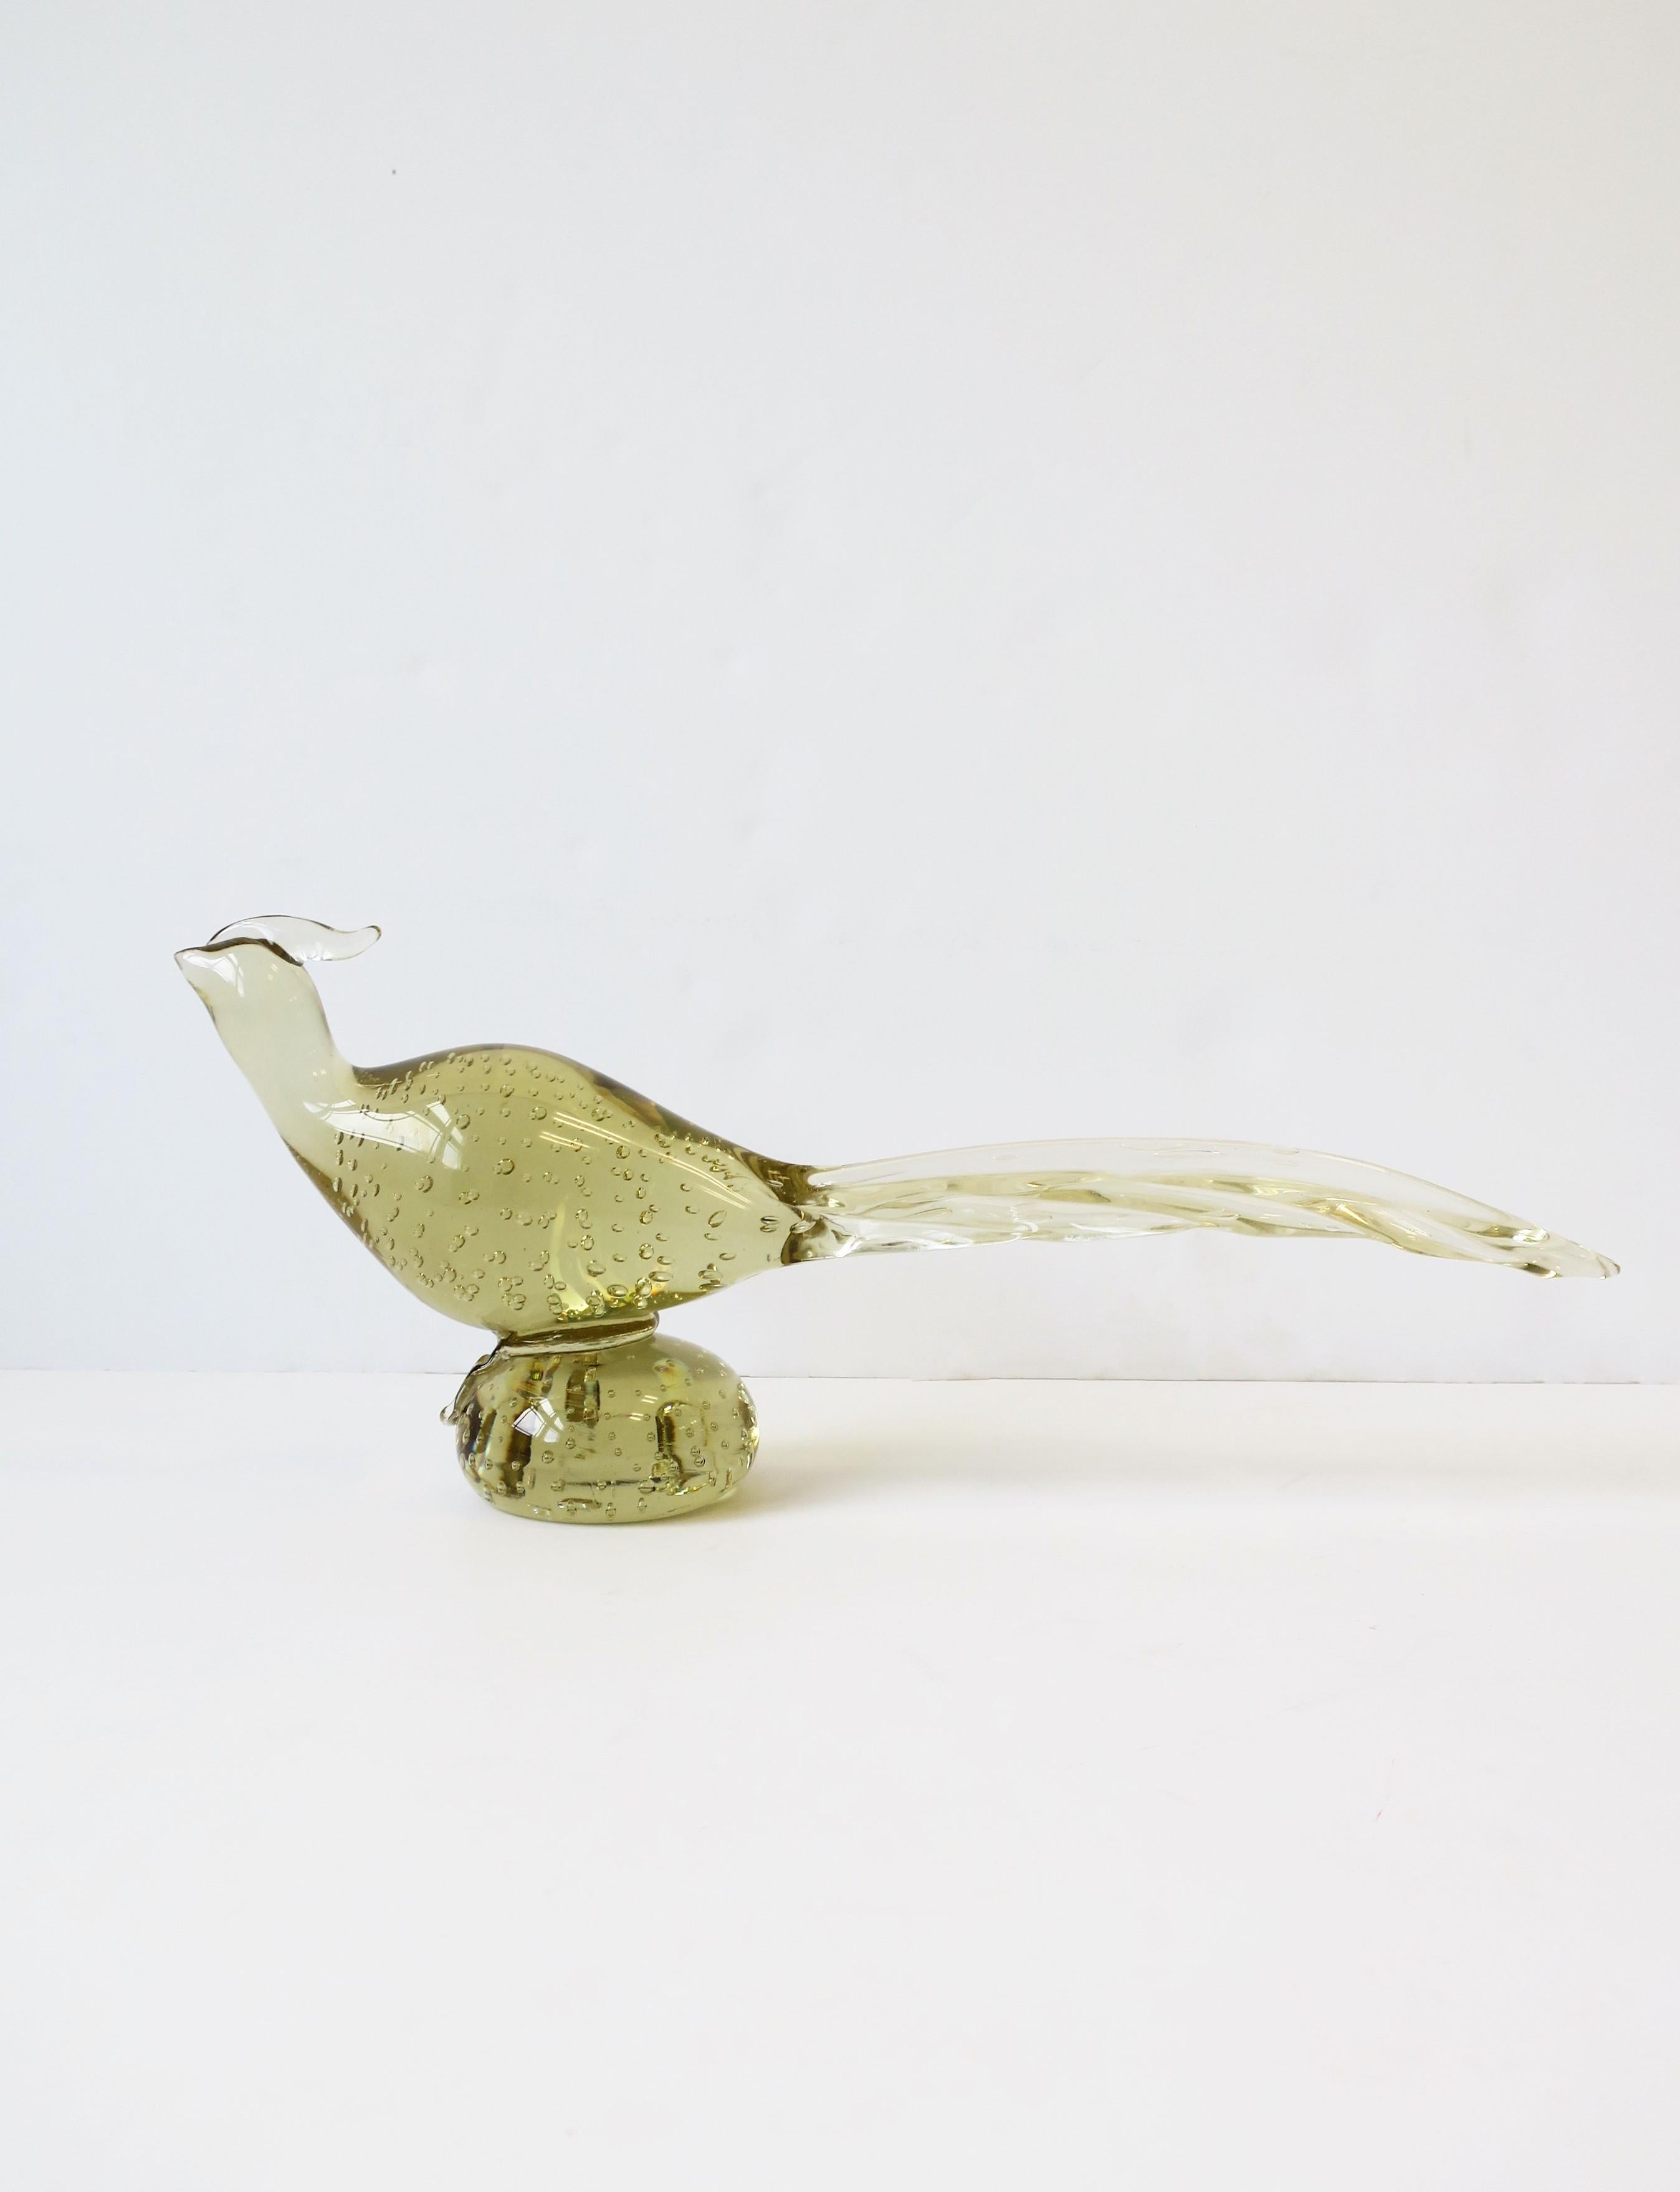 A beautiful, substantial and relatively large Midcentury Modern Italian Murano art glass pheasant bird sculpture attributed to Italian designer Archimede Seguso, circa mid-20th century, 1960s, Italy. Pheasant bird is a light yellow/ginger ale hue